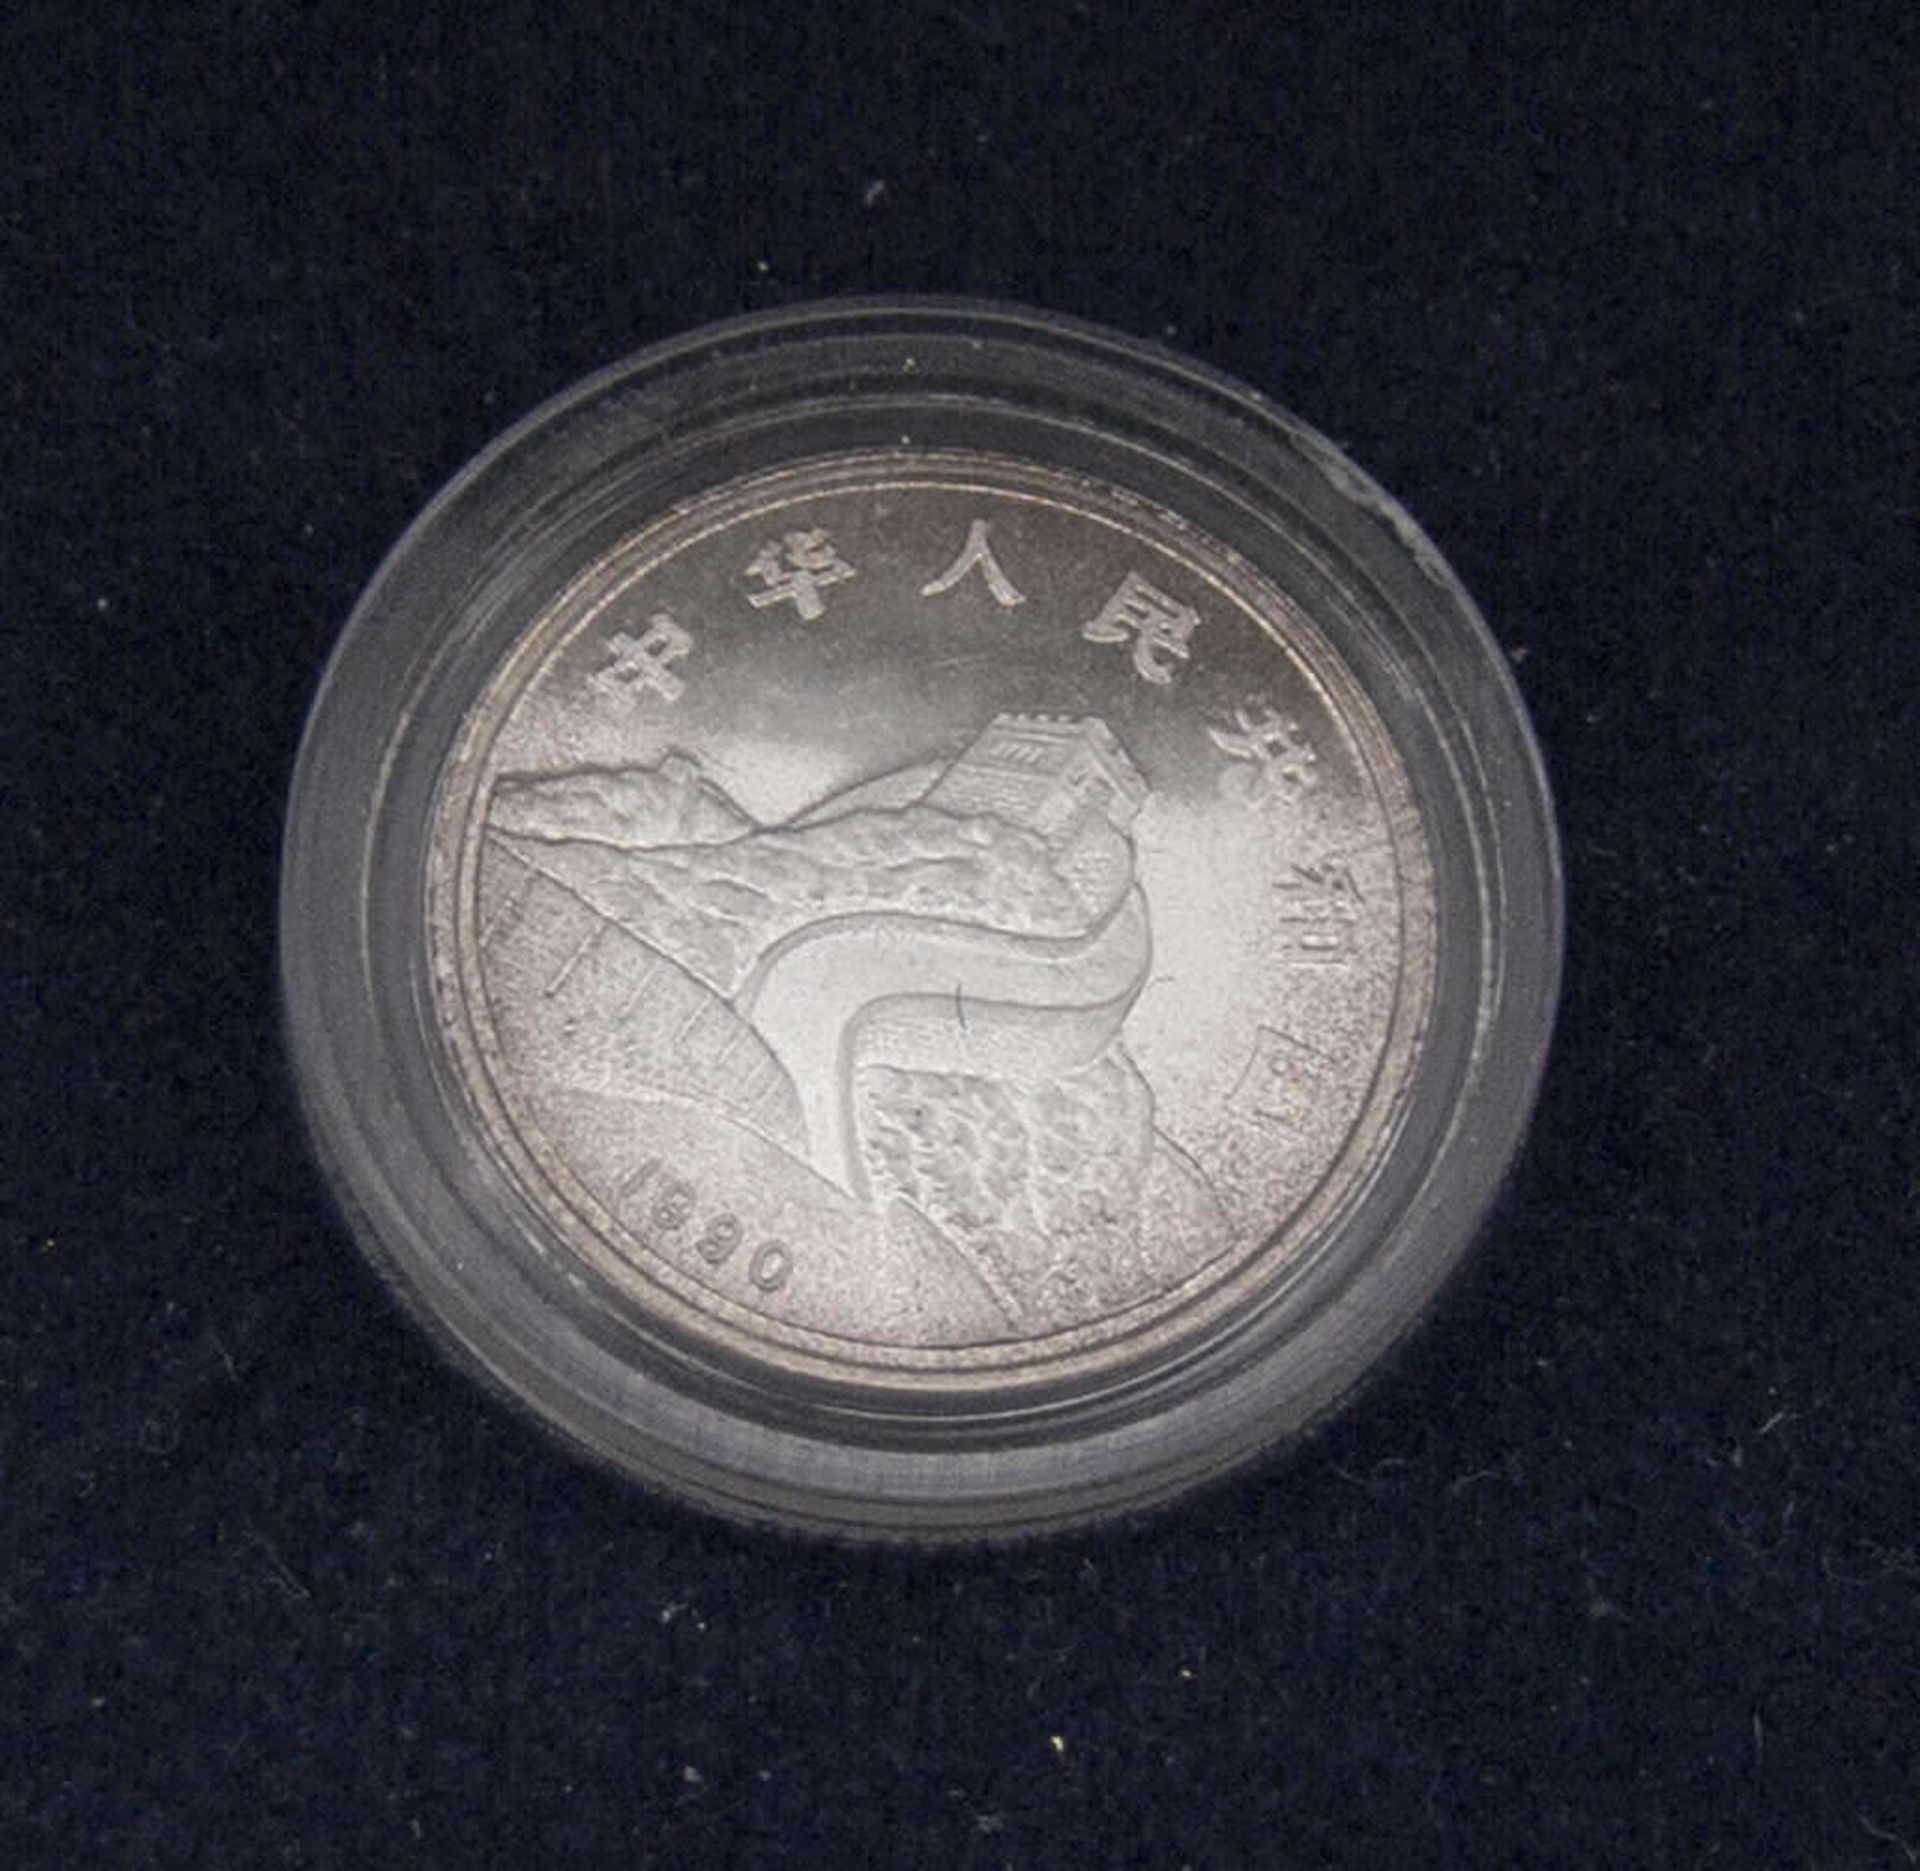 China 1990, 5 Jiao - silver coin in capsule and original case. Dragon and Phoenix - Great Wall of - Image 2 of 2